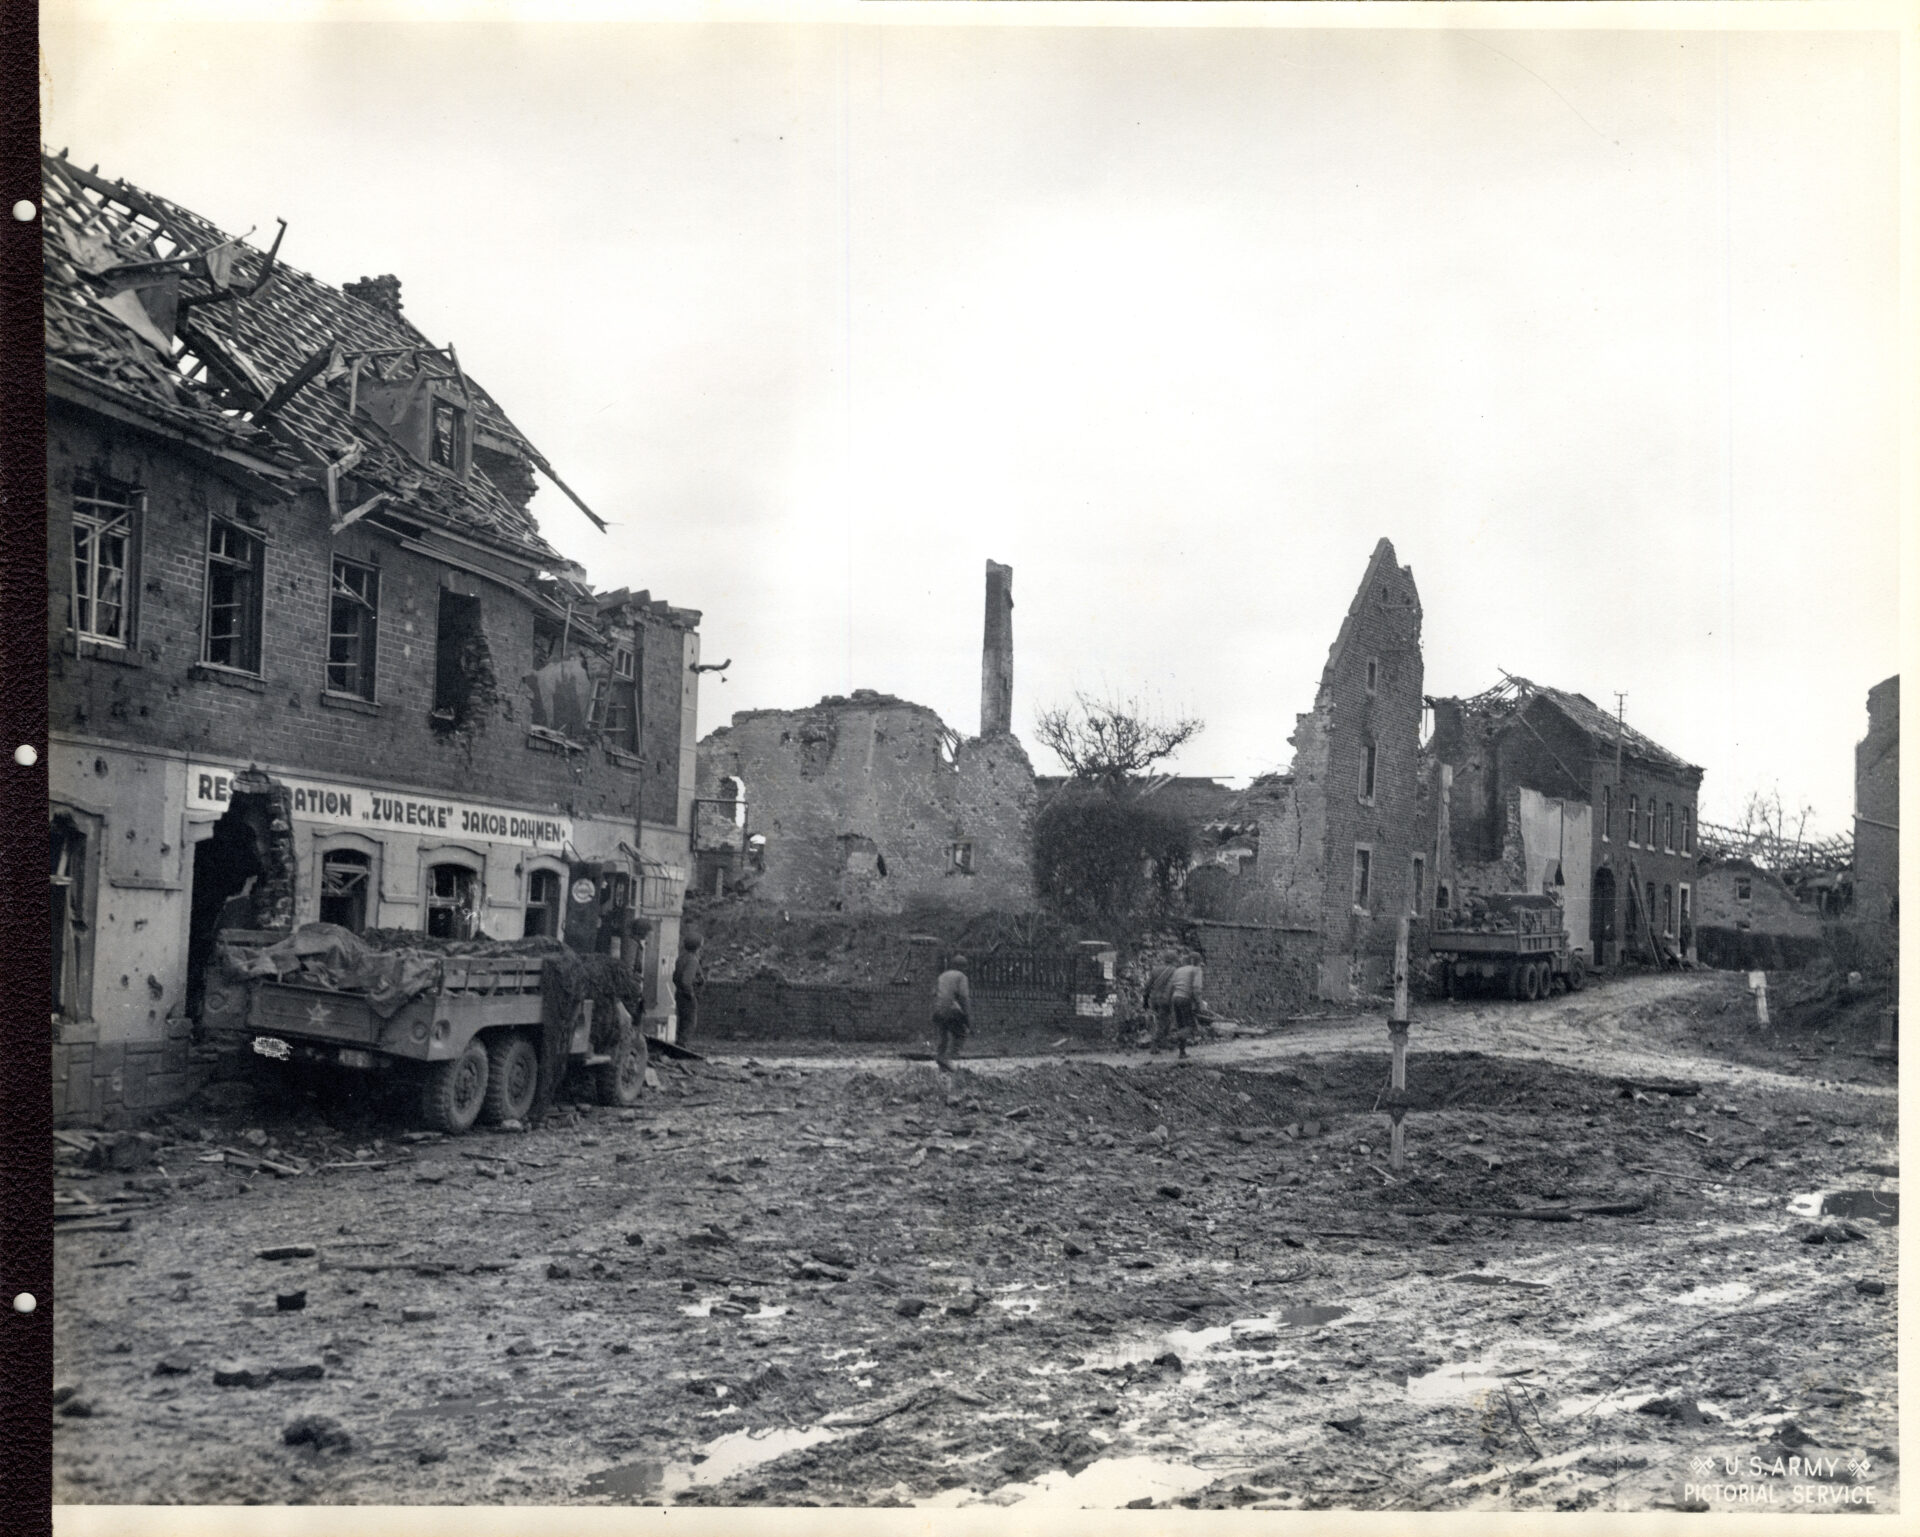 Blasted buildings in Euchen, Germany after the war